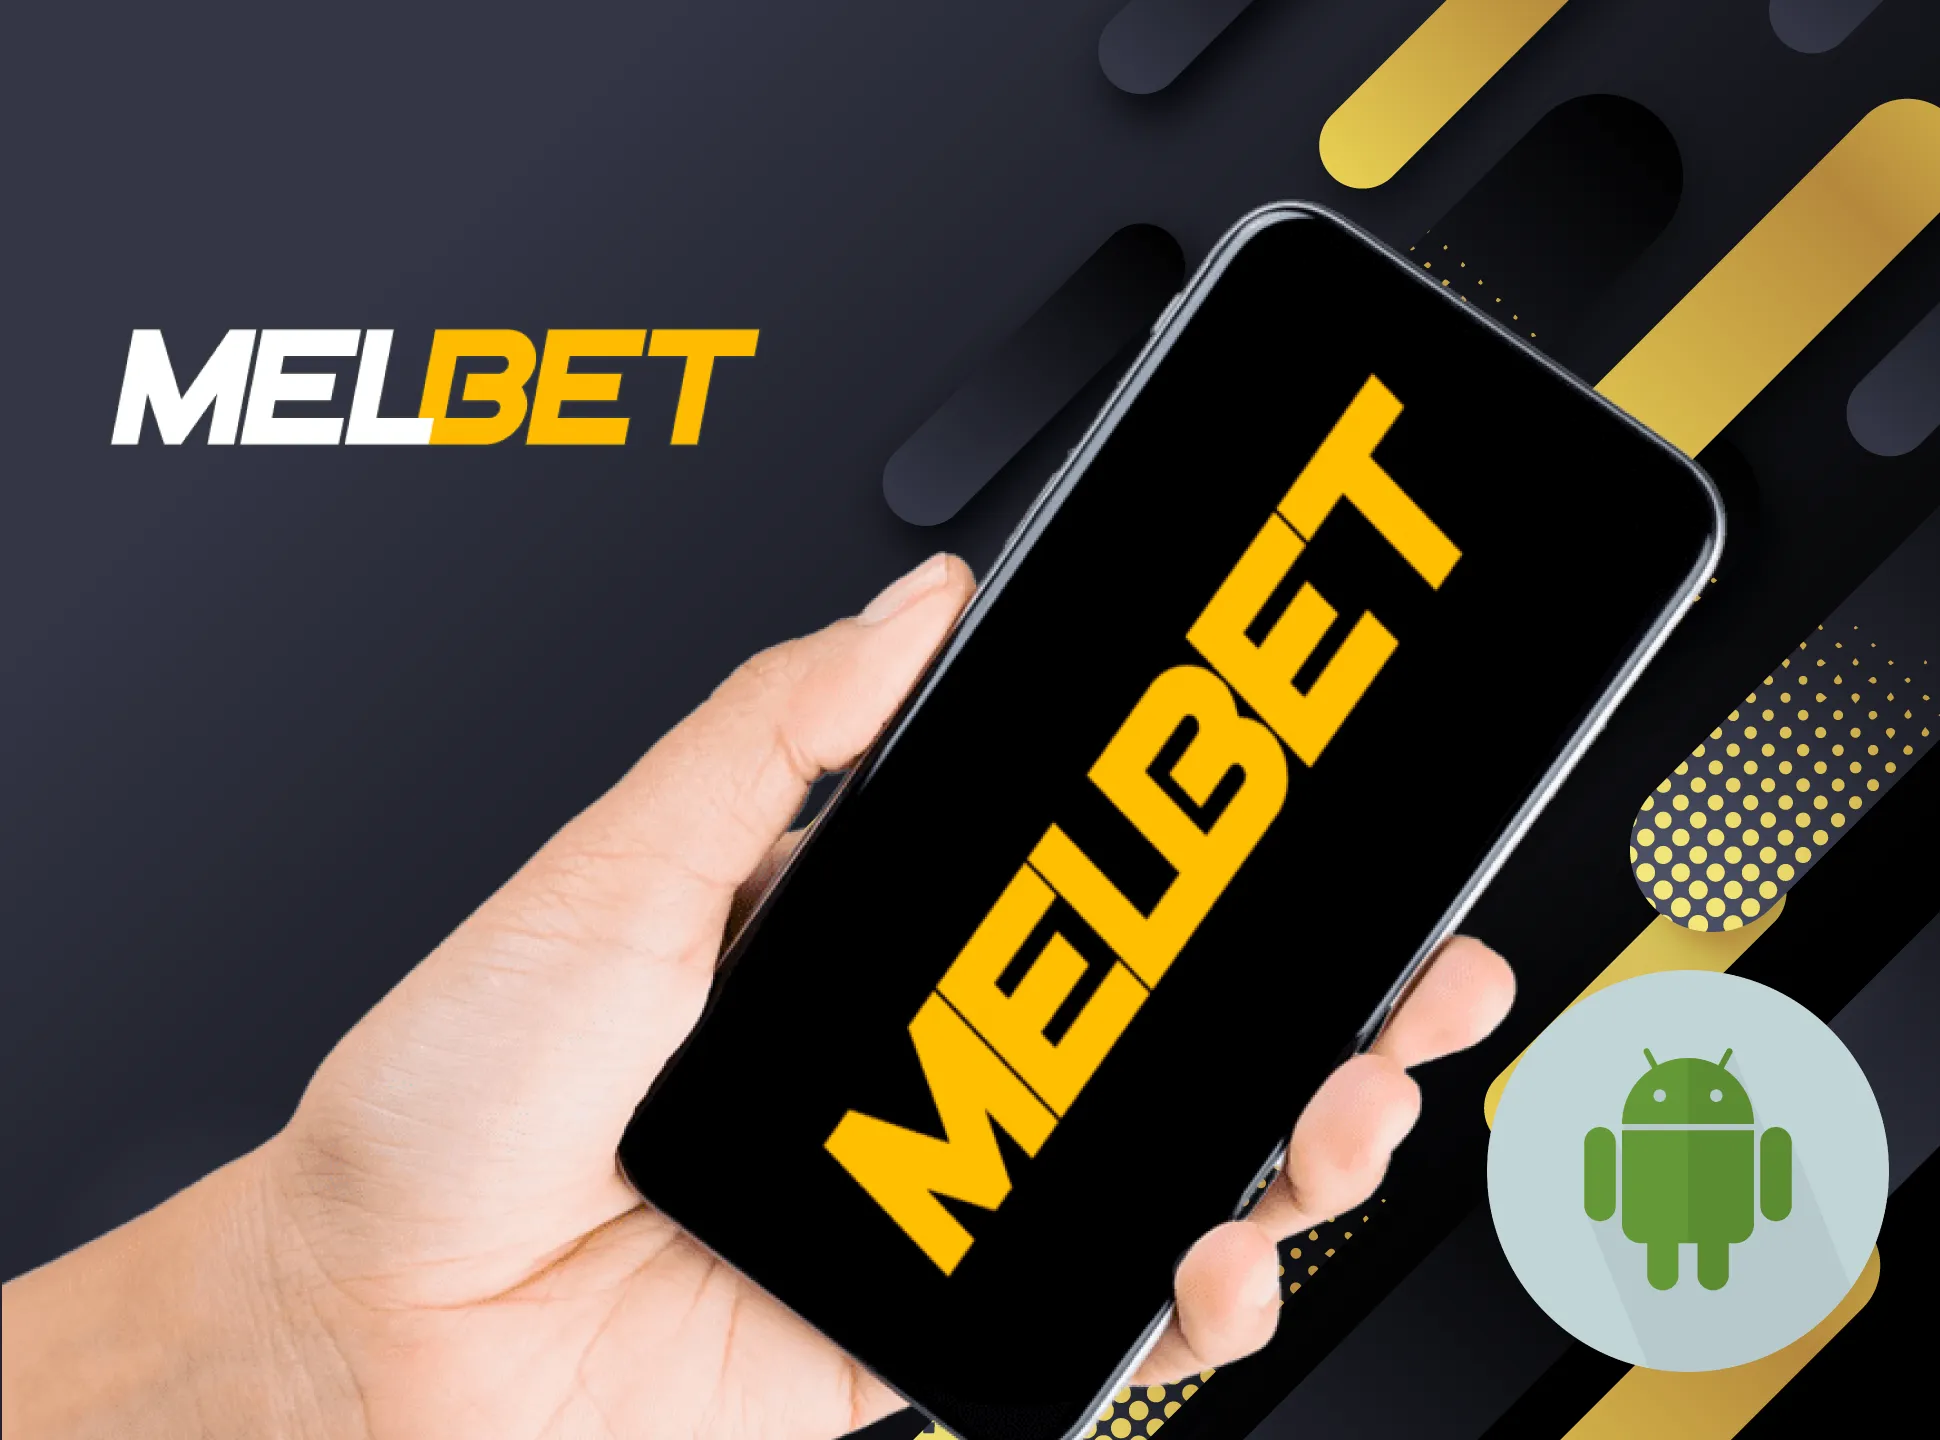 Install the Melbet app on your device.